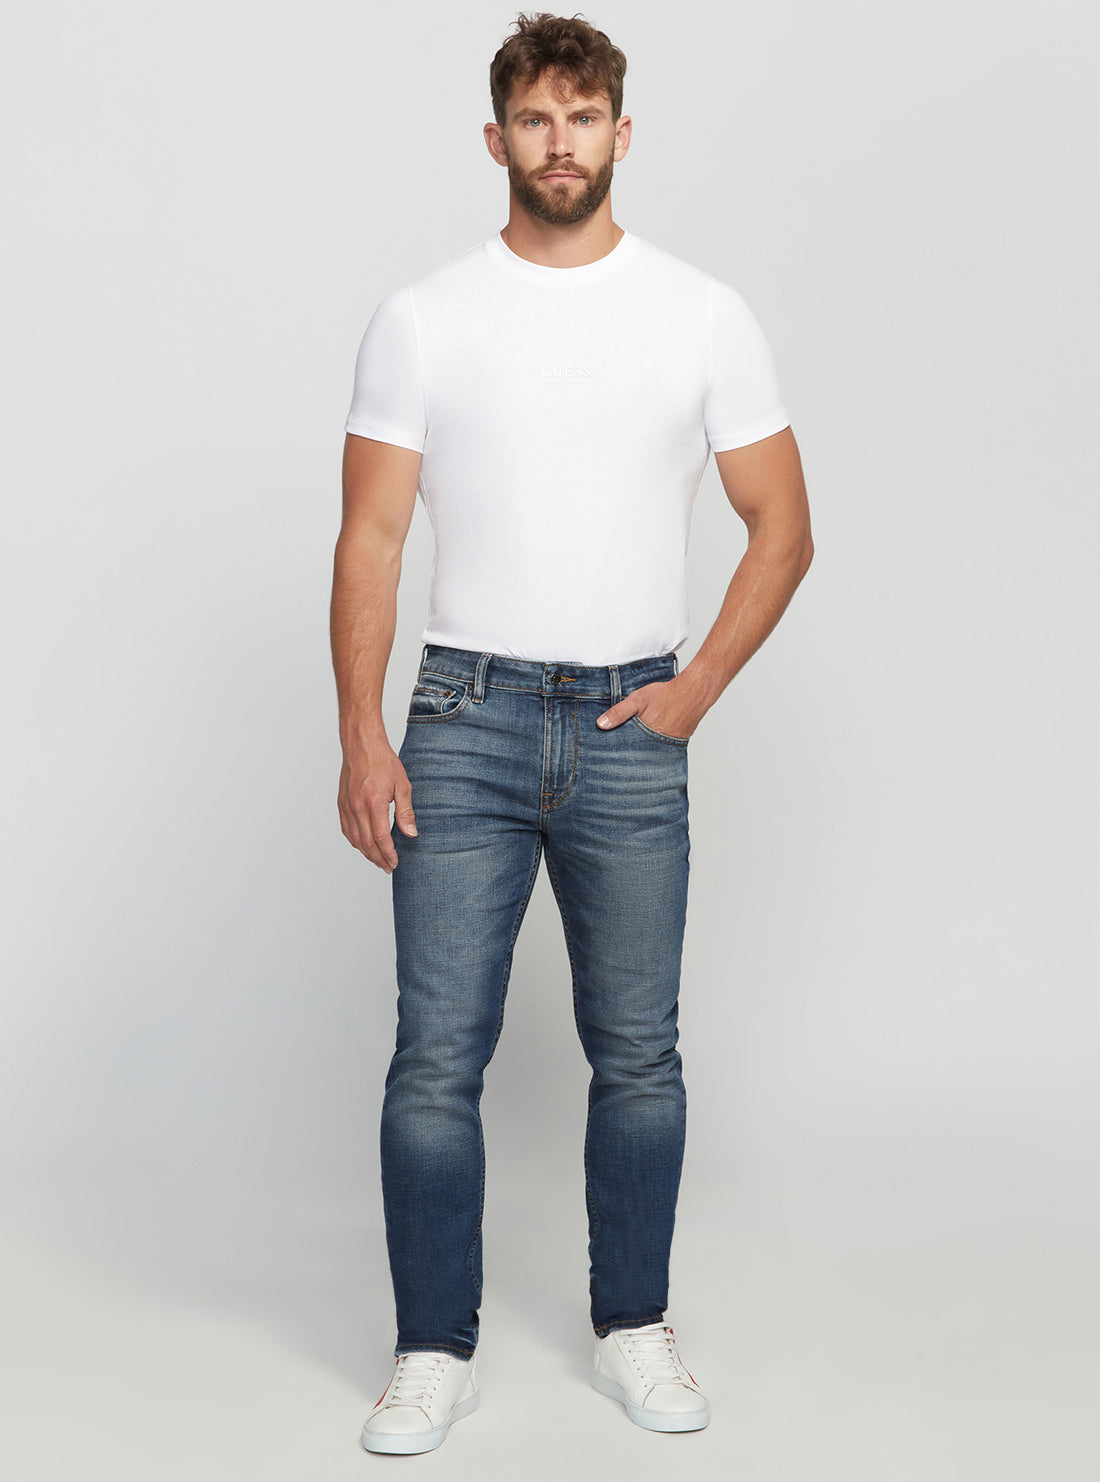 GUESS Men's Eco Low-Rise Slim Tapered Denim Jeans In Stratus Blue Wash MBGAS230411 Full View